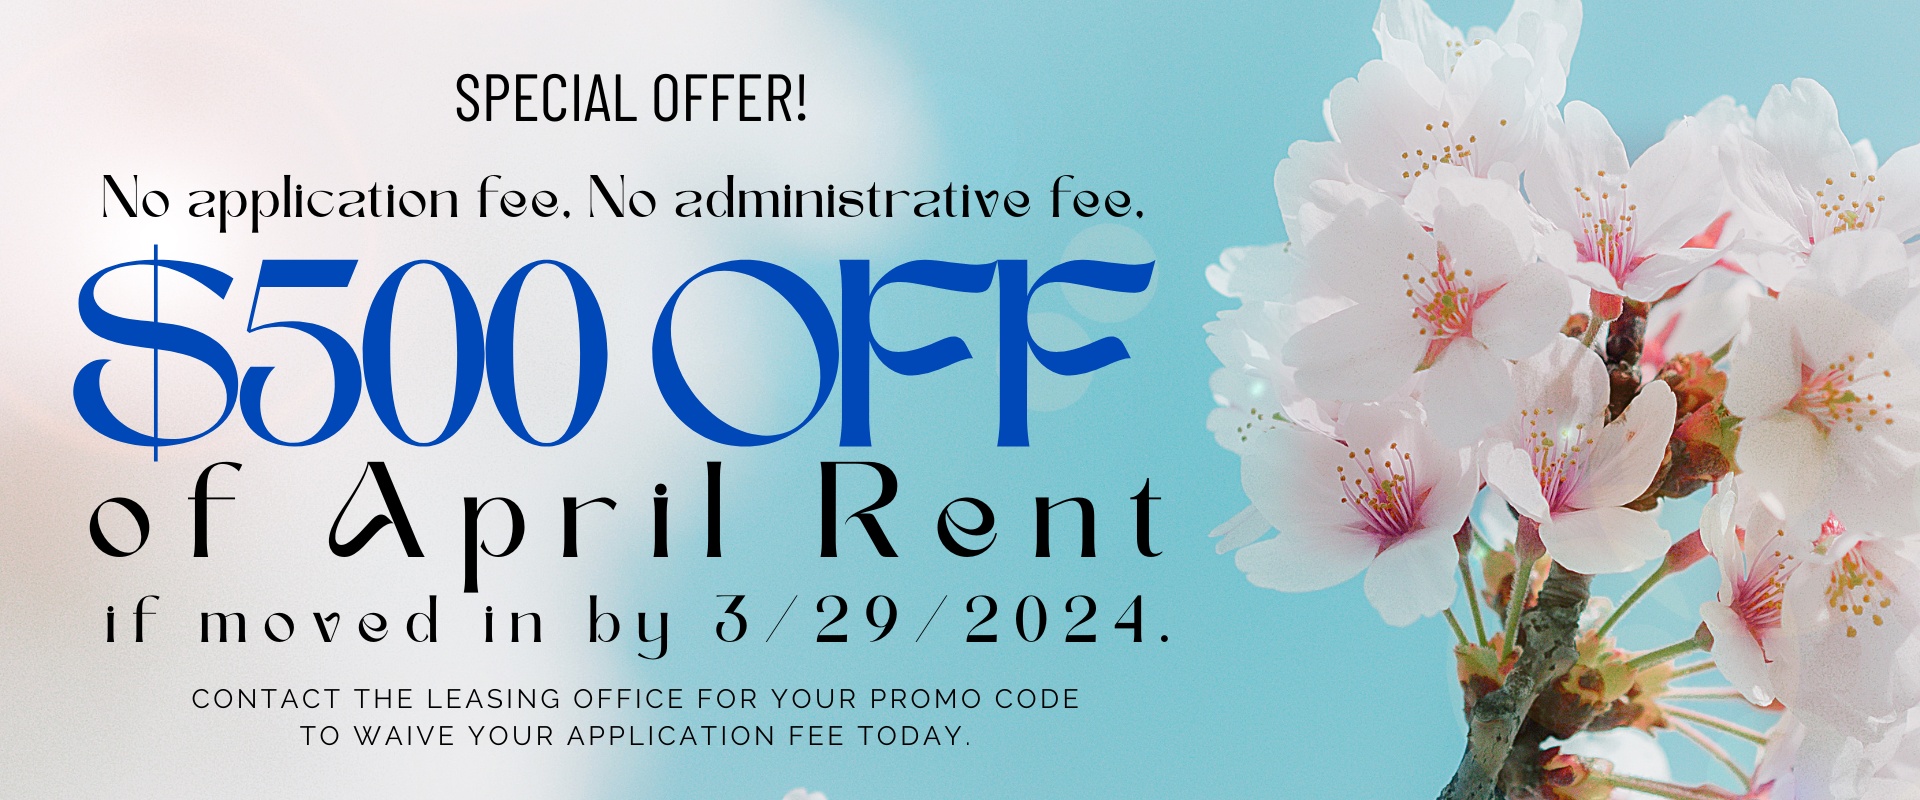 No application fee, No administrative fee,   $500 off of April rent if moved in by 3/29/2024.   contact the leasing office for your promo code to waive your application fee today